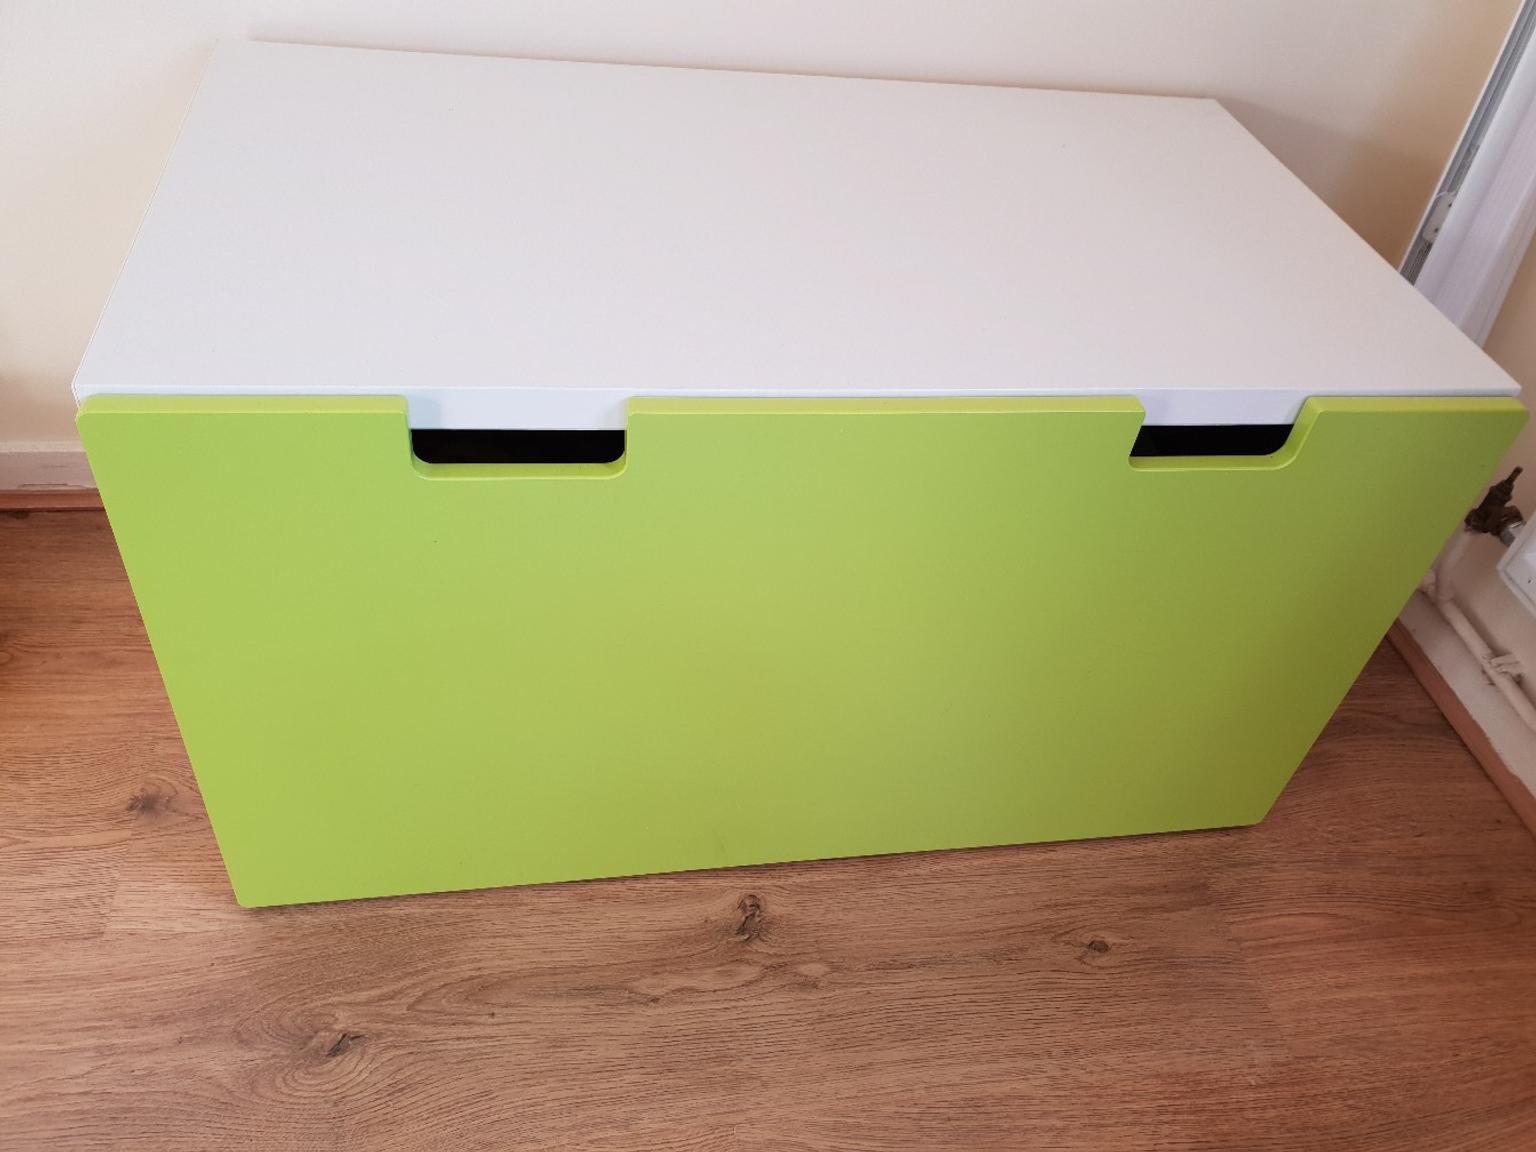 toy chest bench ikea